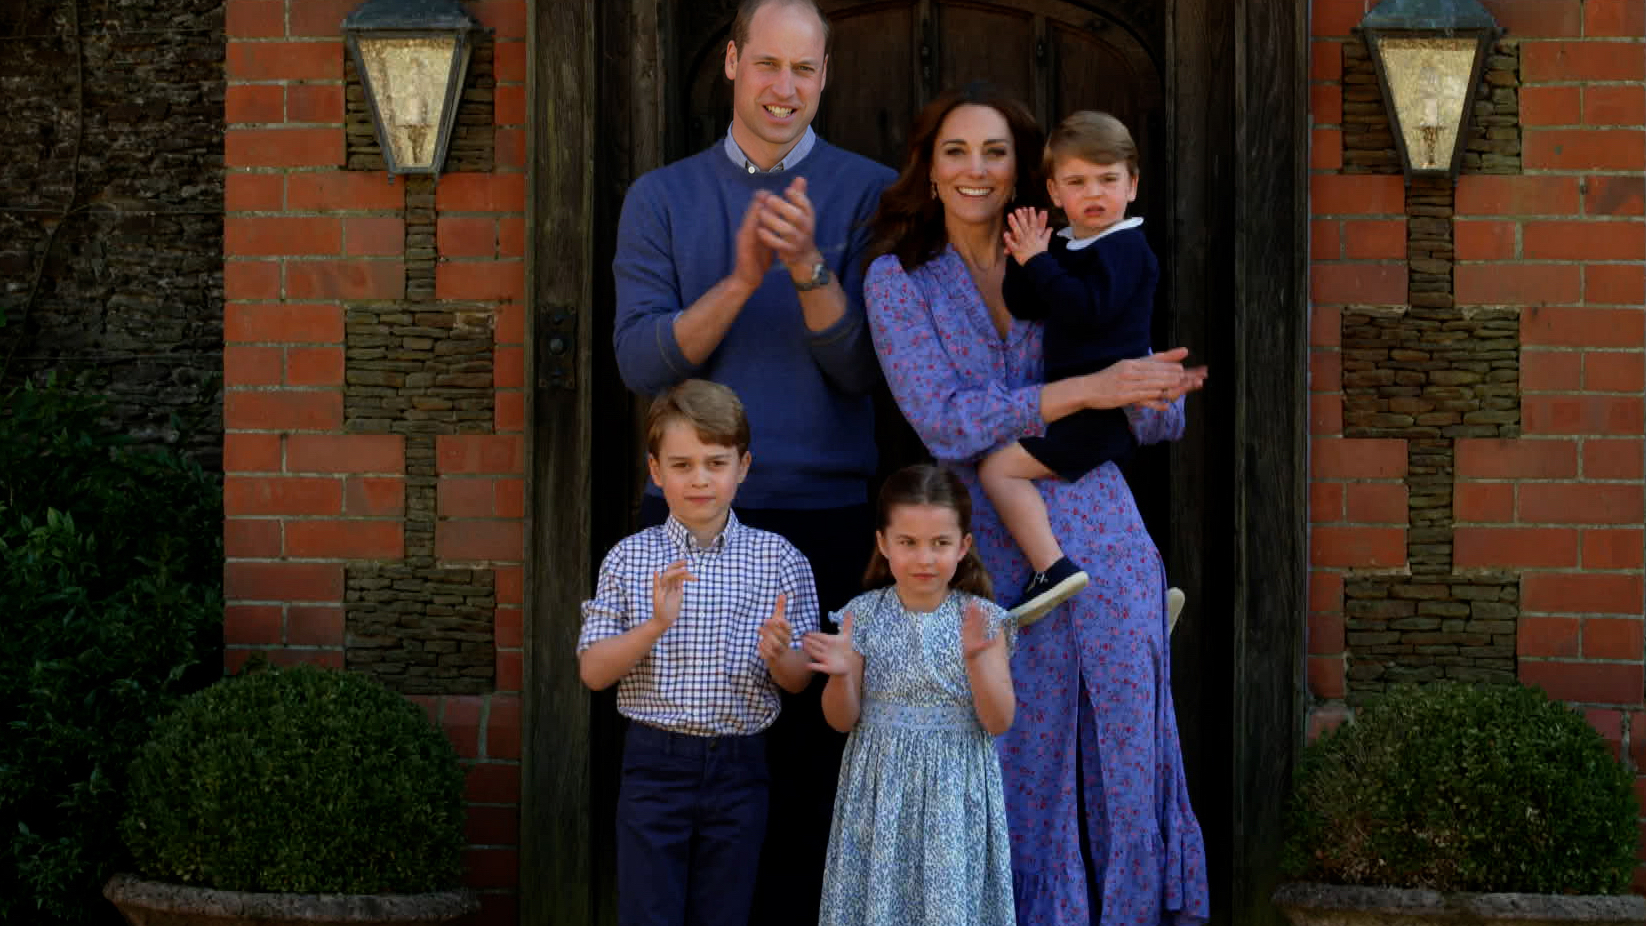 Palace updates on Kate Middleton’s health as Prince William misses event for personal reasons